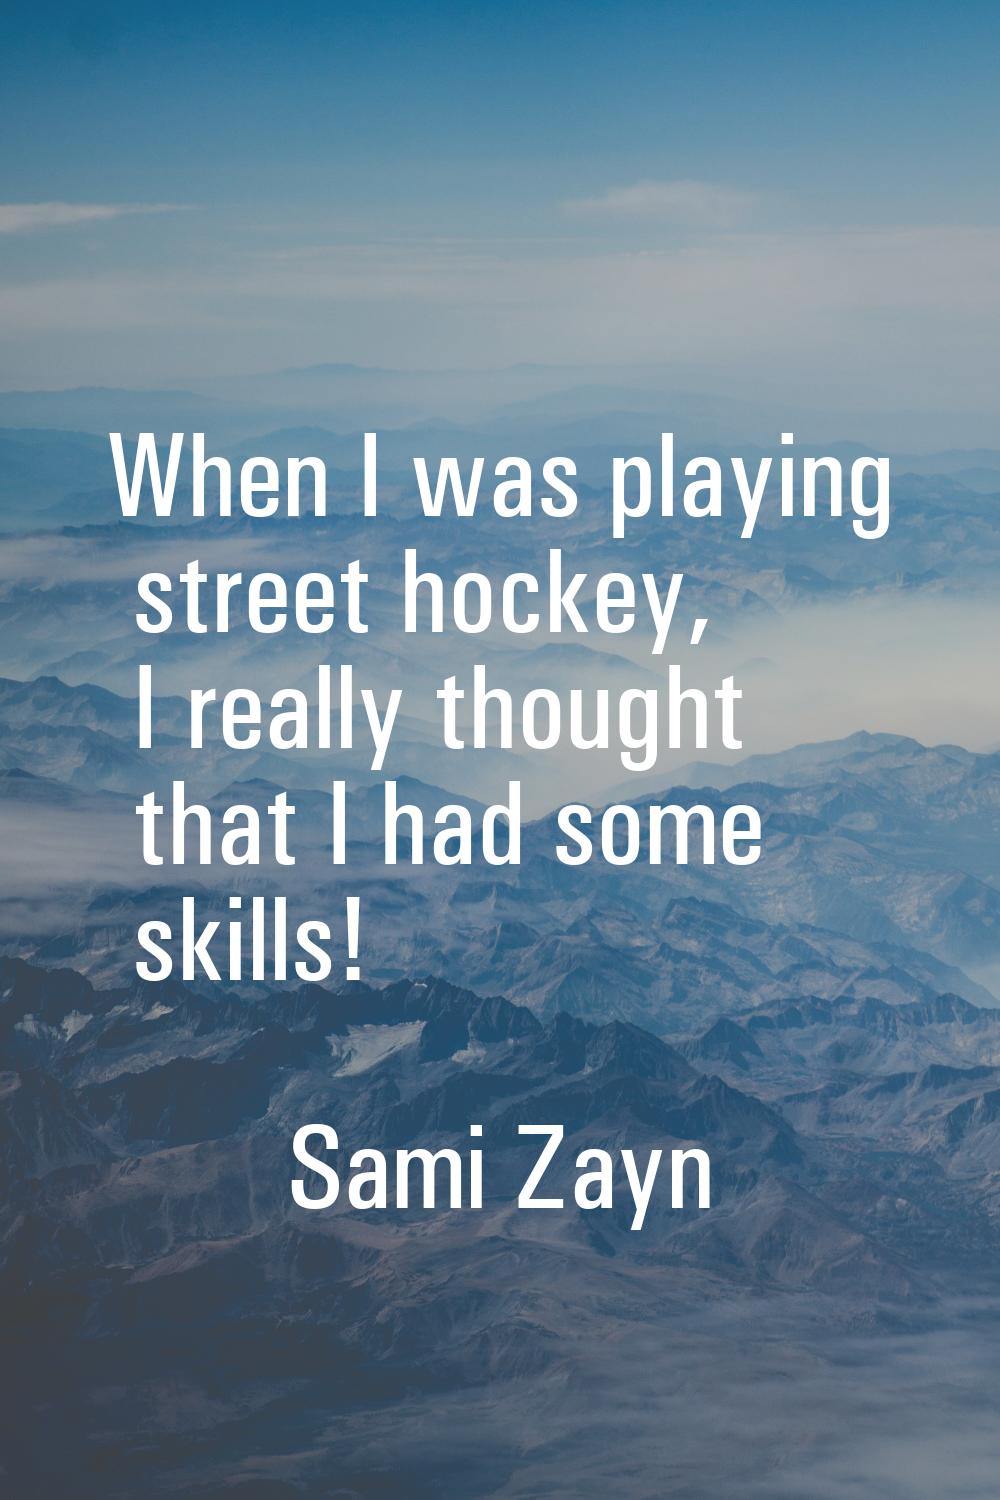 When I was playing street hockey, I really thought that I had some skills!